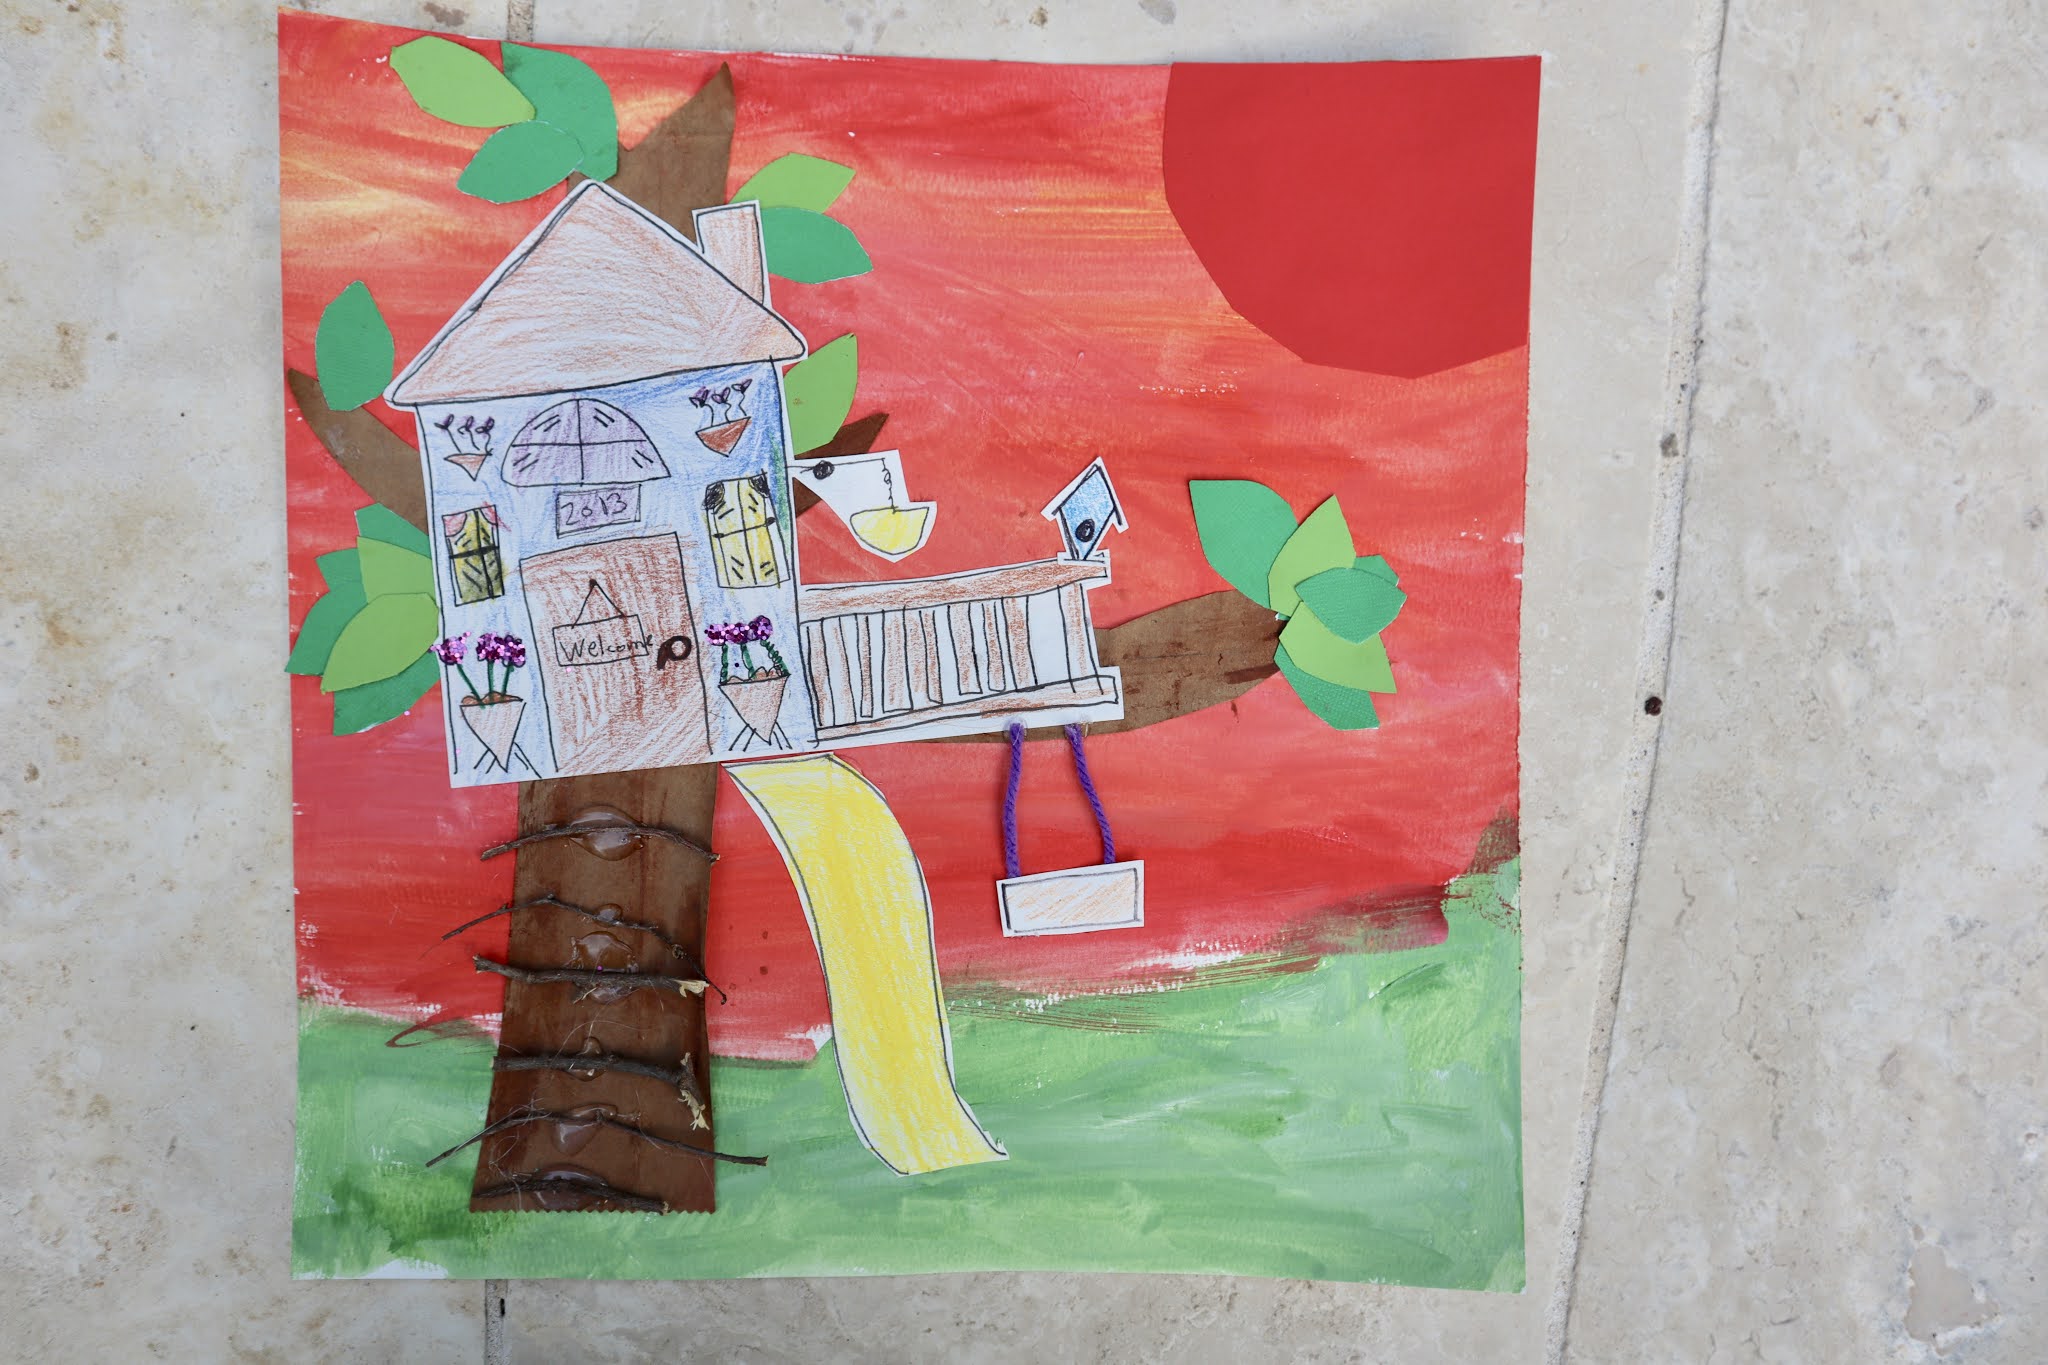 ART PANTRY ages 8-12 years - TREEHOUSE kid and craft